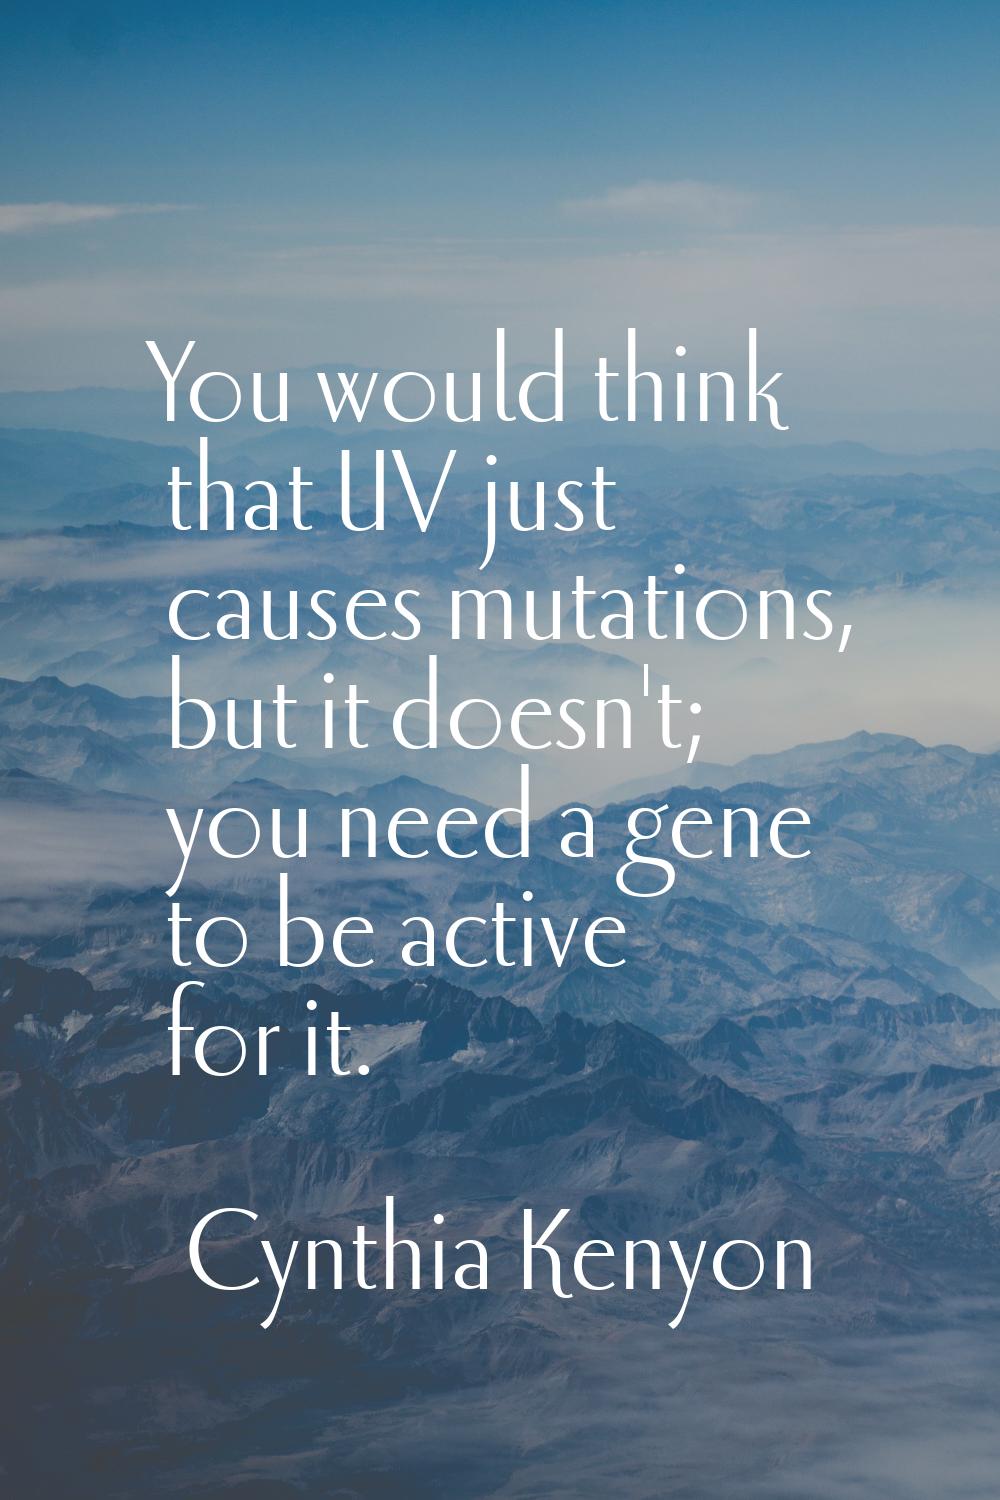 You would think that UV just causes mutations, but it doesn't; you need a gene to be active for it.